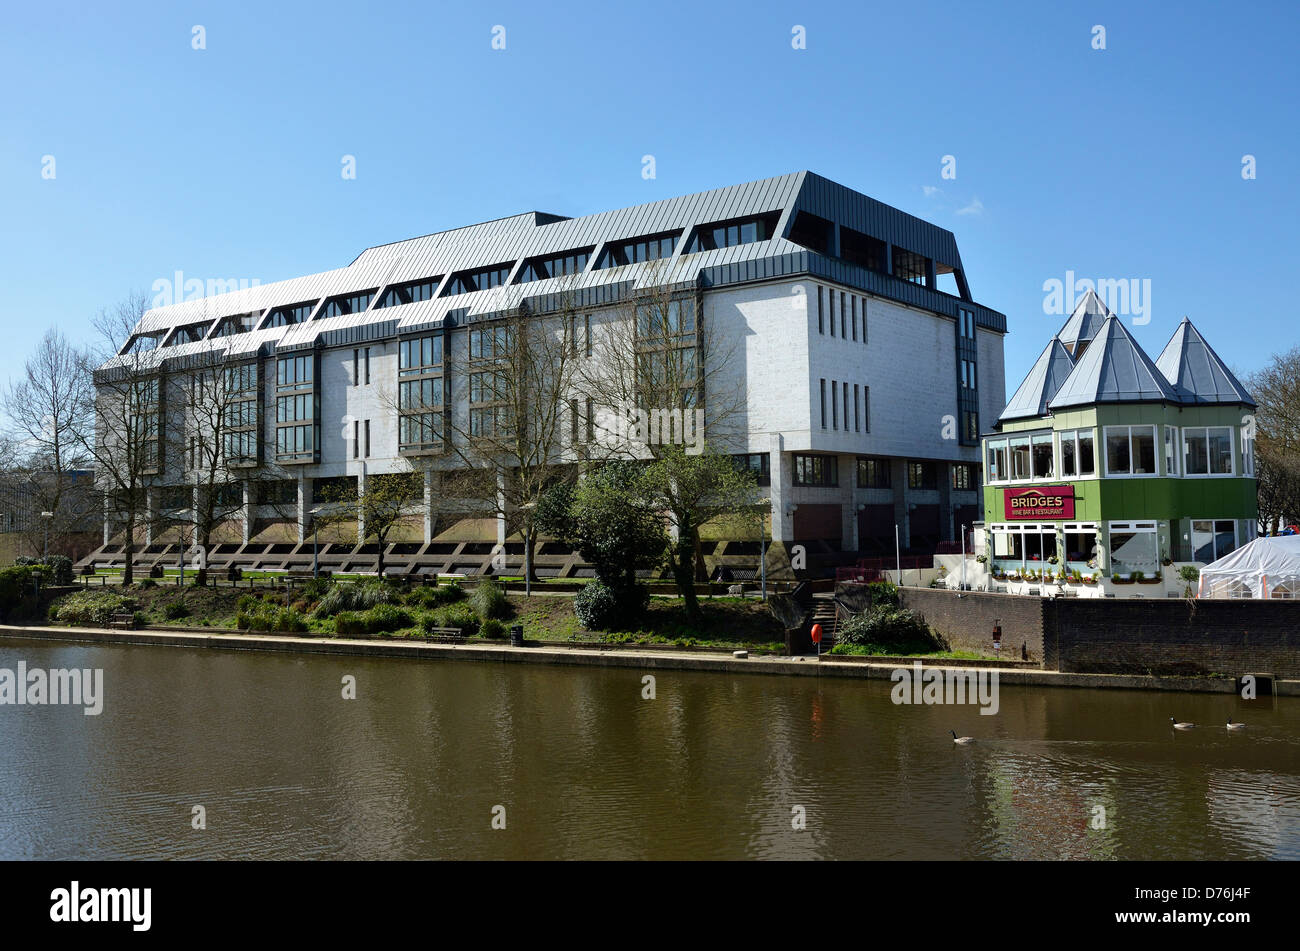 Maidstone, Kent, England, UK. The Law Courts; Crown Court / County Court, by the river Medway. Stock Photo